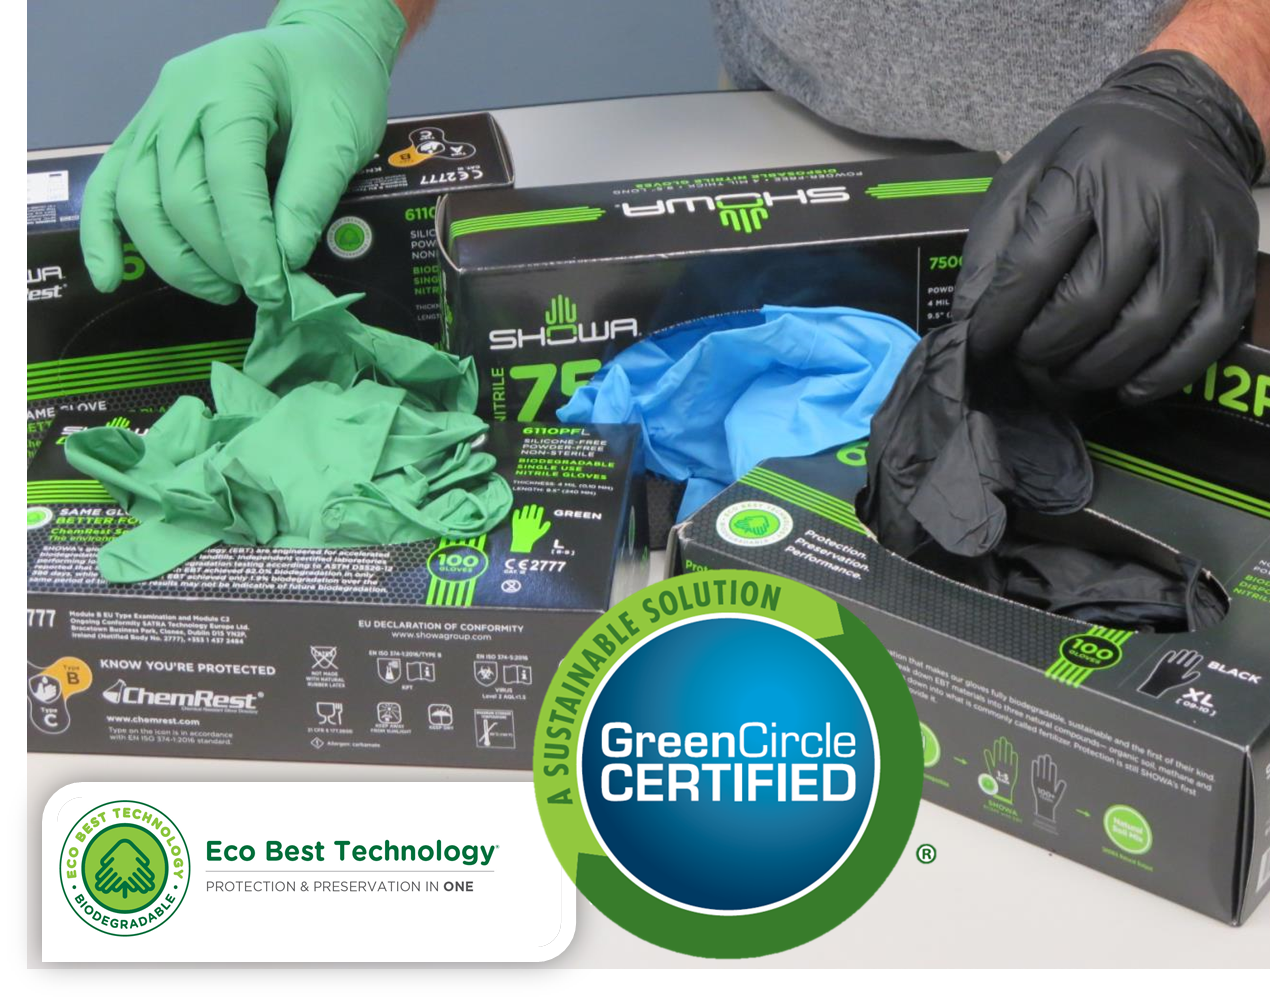 SHOWA EBT Nitrile Glove Boxes and Black, Green and Blue Gloves